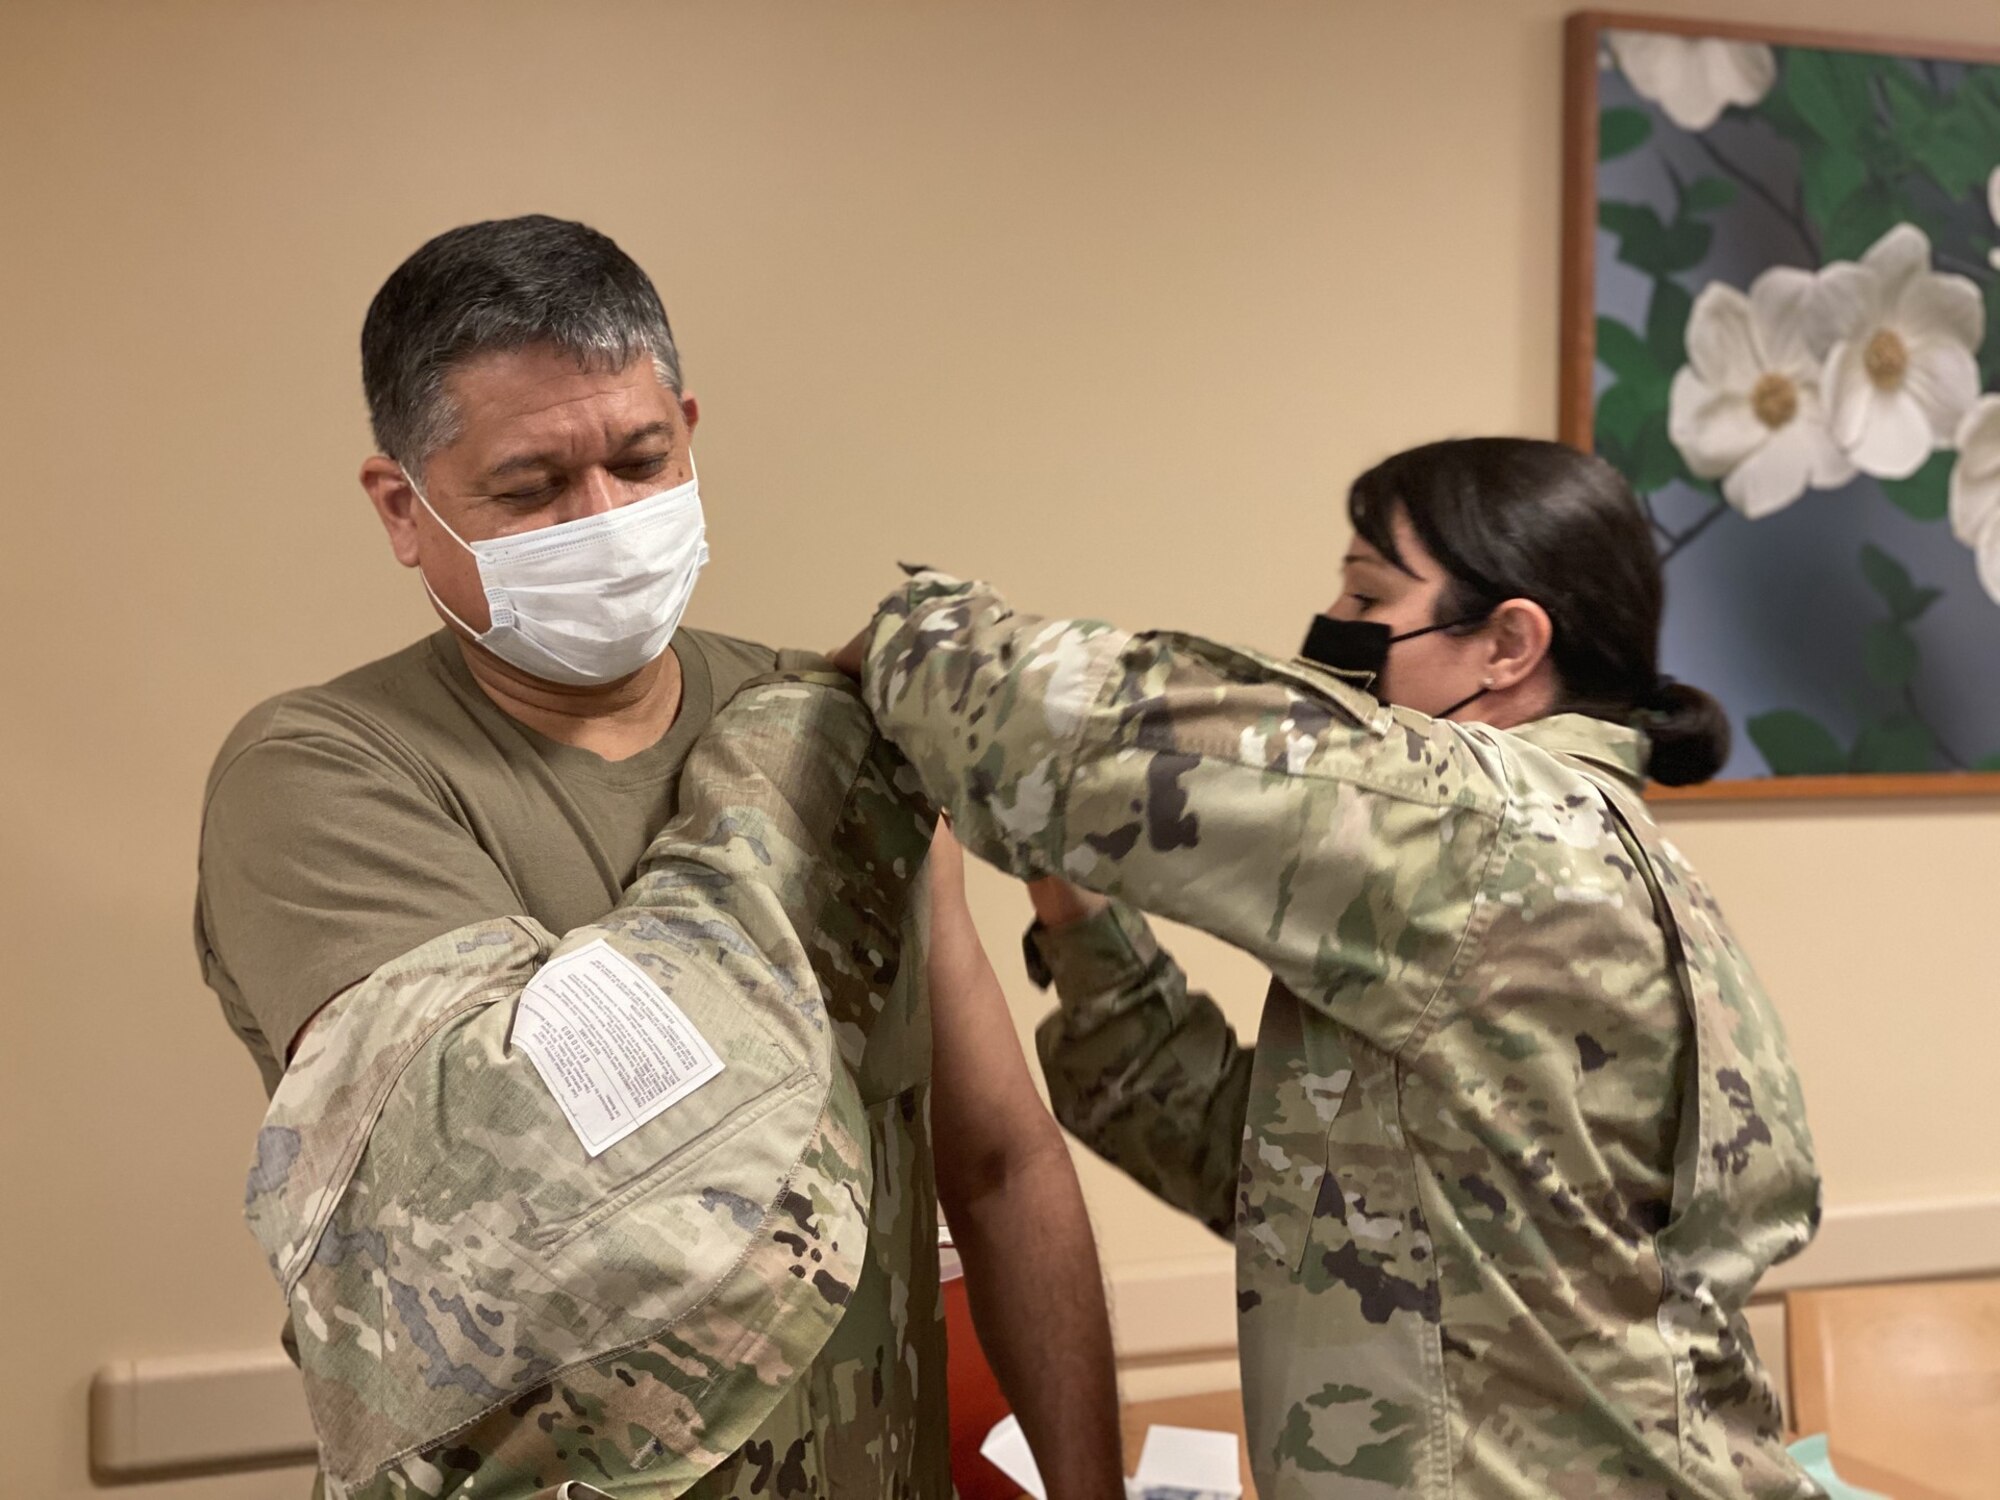 Tech. Sgt. Lisa Gonzales-Marin, 349th Aerospace Medical Squadron medical technician, administers a COVID-19 vaccination to Master Sgt. Julian Recendez, 349th Force Support Squadron training manager, at David Grant Medical Center at Travis Air Force Base, California, on Feb. 26, 2021. Reserve Citizen Airmen from the 349th Airlift Wing received their first COVID-19 vaccine during the March drill weekend. Each member receiving the vaccine was monitored for development of side effects and waited 15 minutes after getting the vaccine before they were allowed to leave. The two-dose vaccine was recently approved by the Food and Drug Administration under an emergency use authorization and are currently offered to Defense Department personnel on a voluntary basis. Reservists receiving the Moderna COVID-19 Vaccine will receive their second dosage 28 days after receiving the first dosage. (U.S. Air Force courtesy photo/Released)